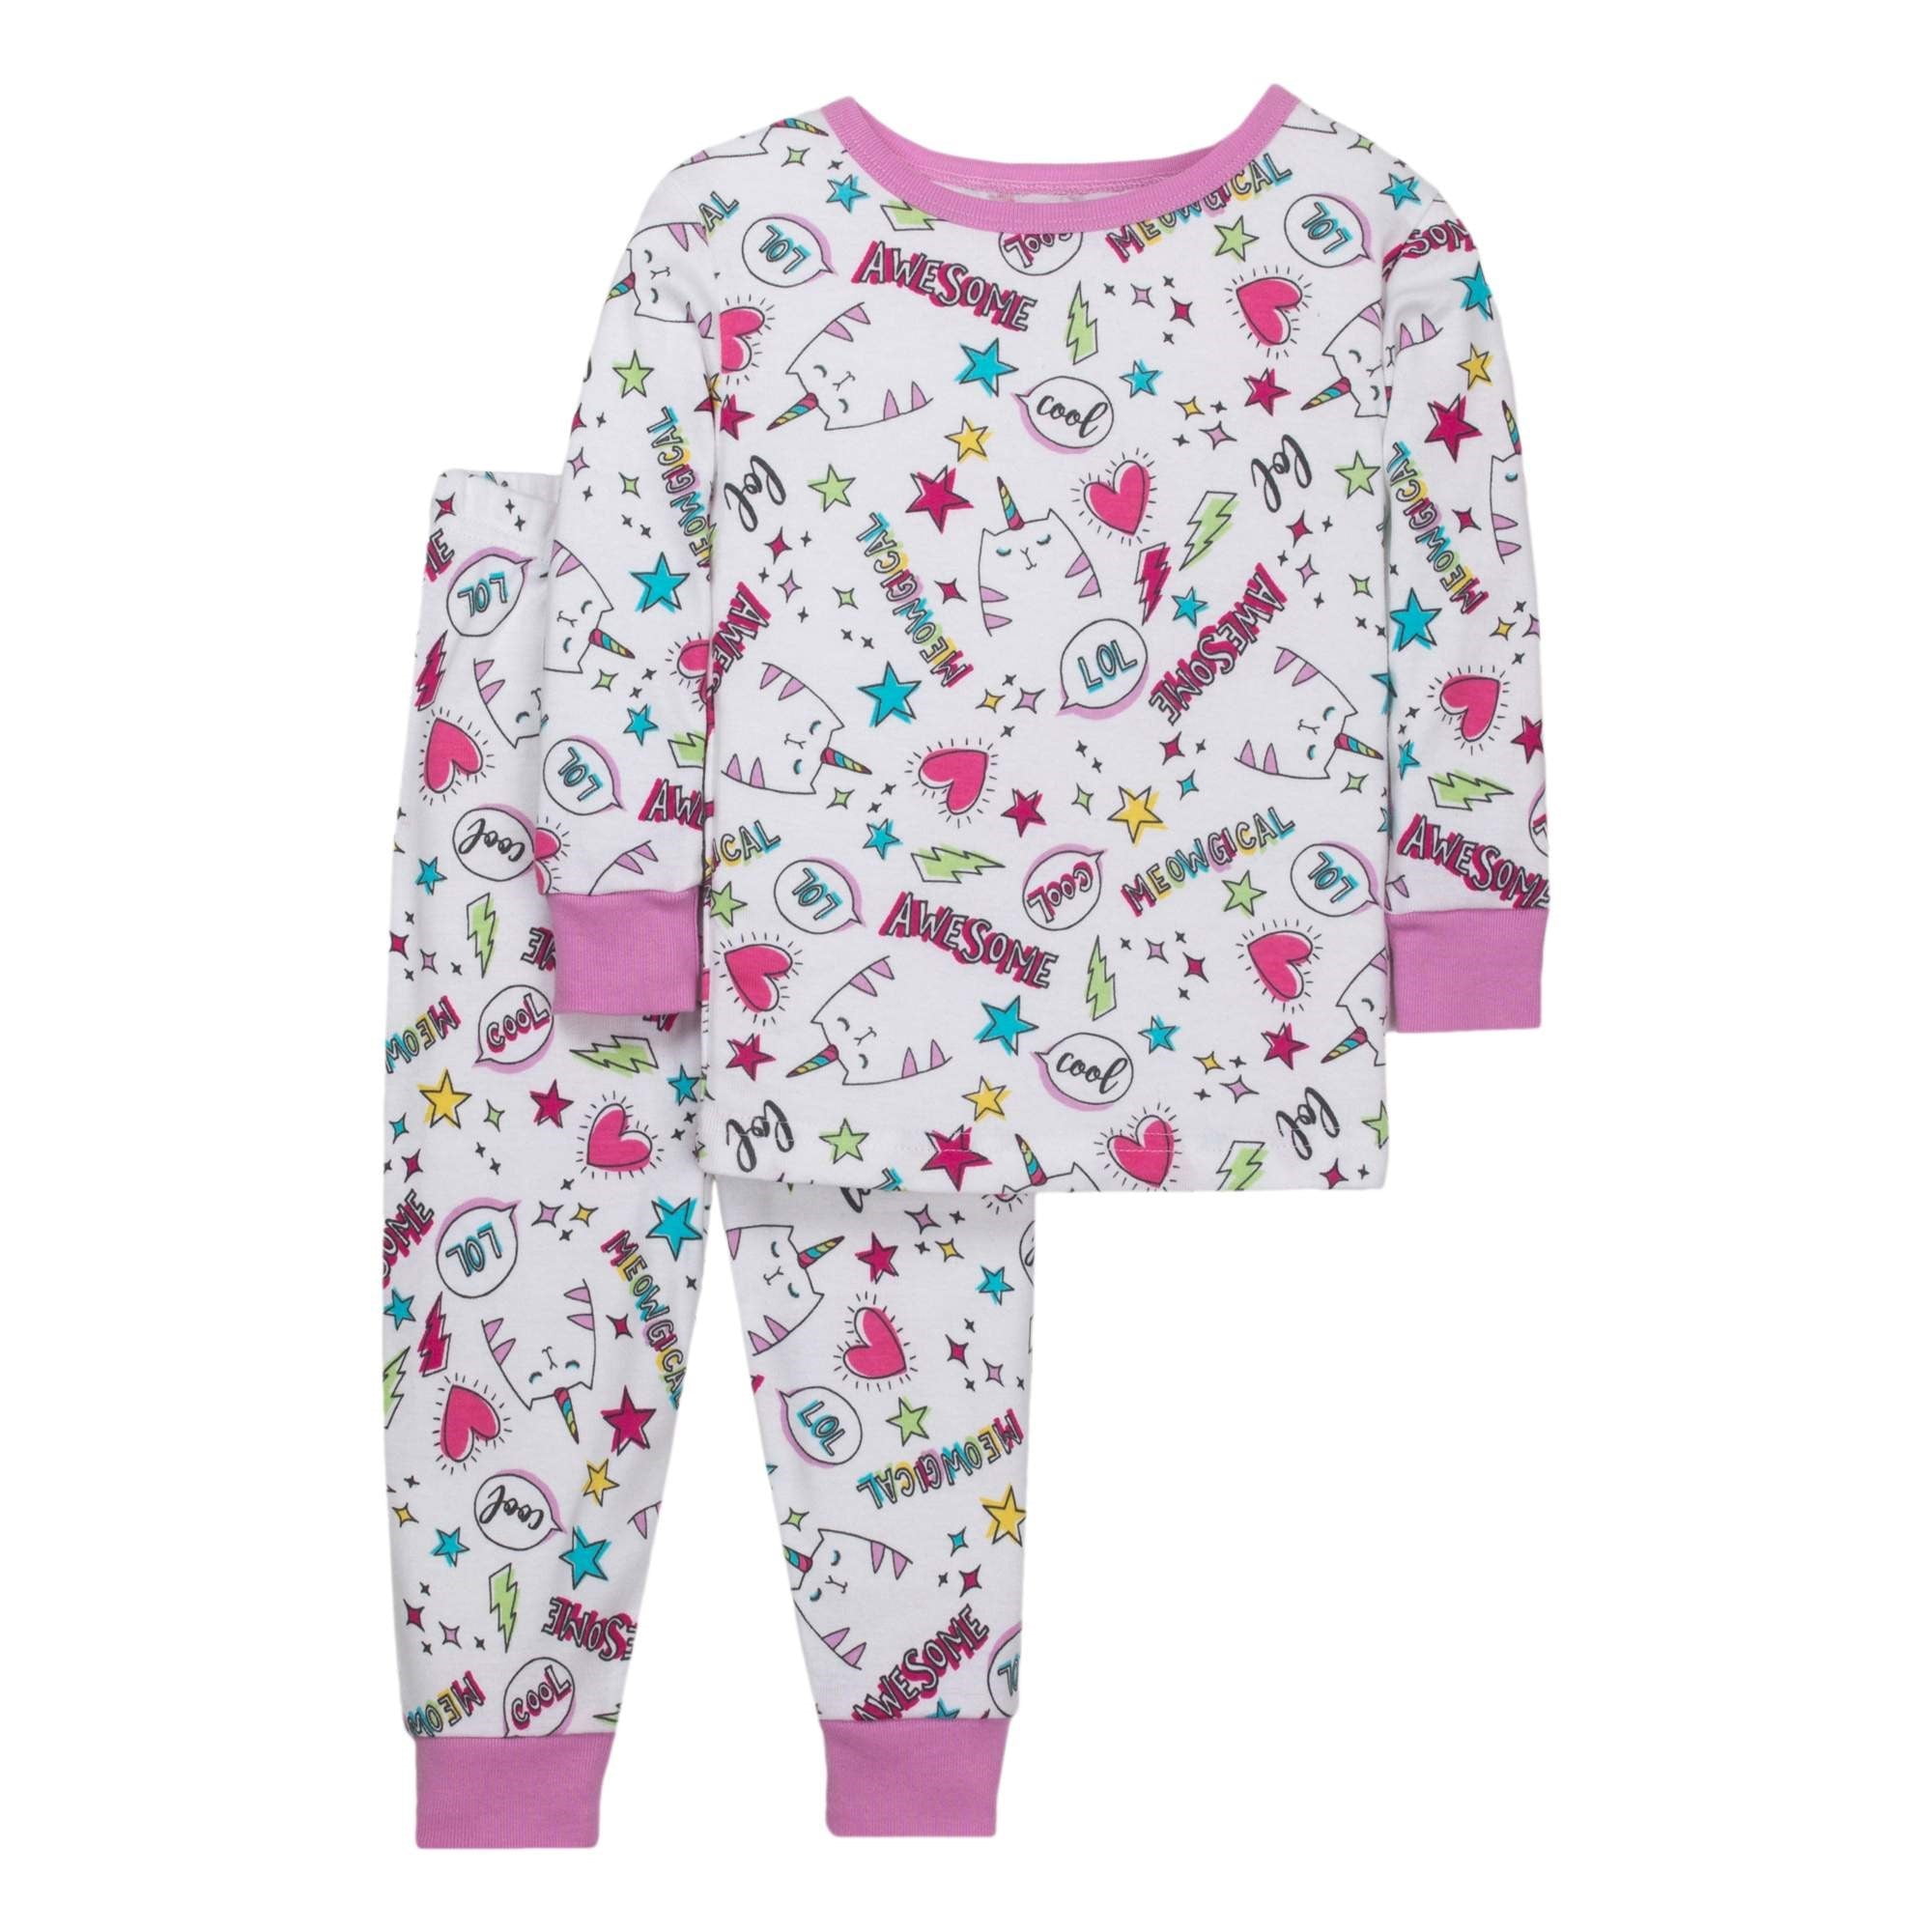 Little Star Organic - Toddler Baby Girl Tight Fit Pajamas, 2-piece ...